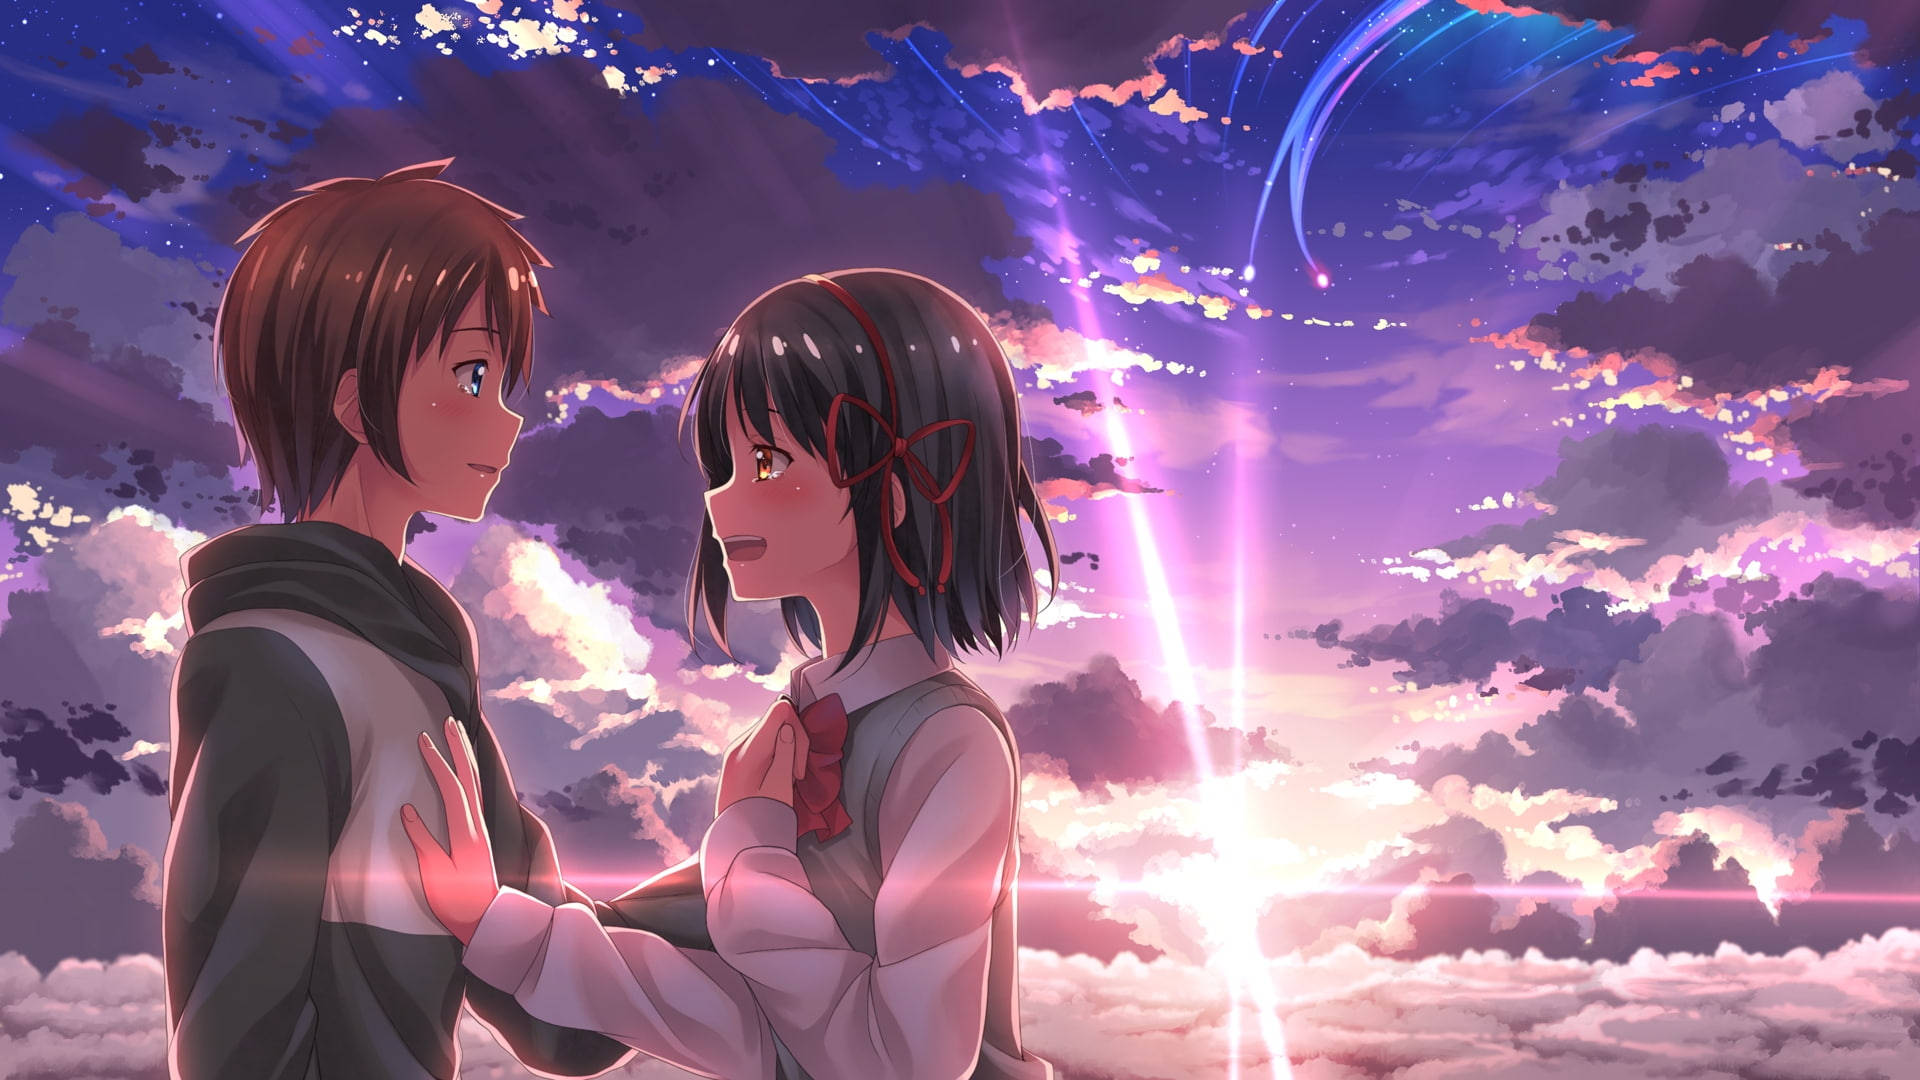 Cute Anime Couple And Cloudy Sunset Wallpaper